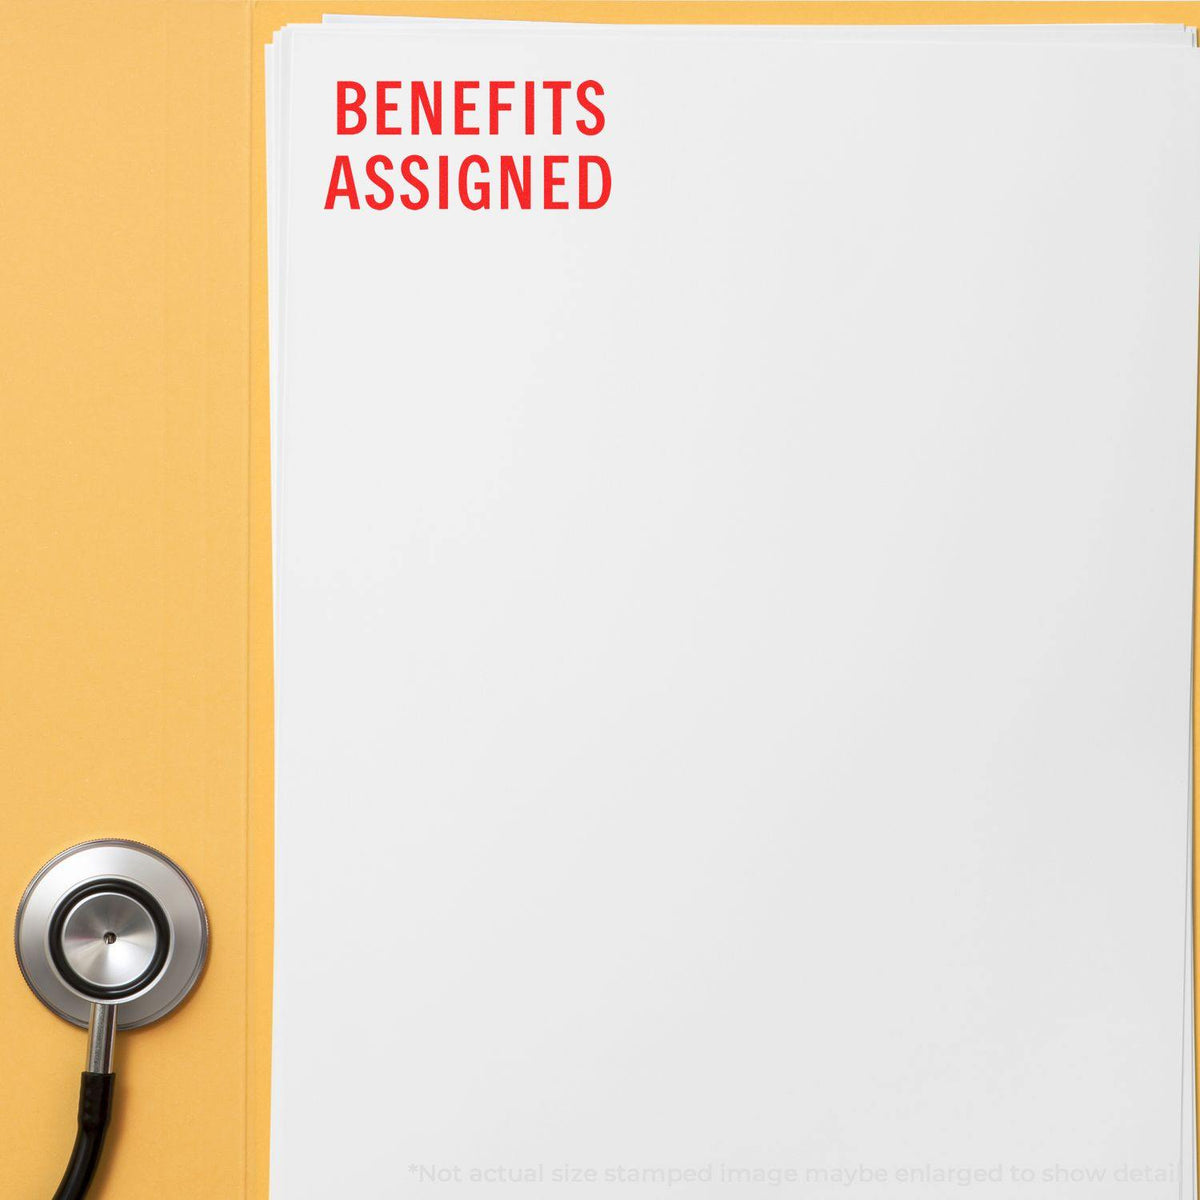 Benefits Assigned Rubber Stamp In Use Photo